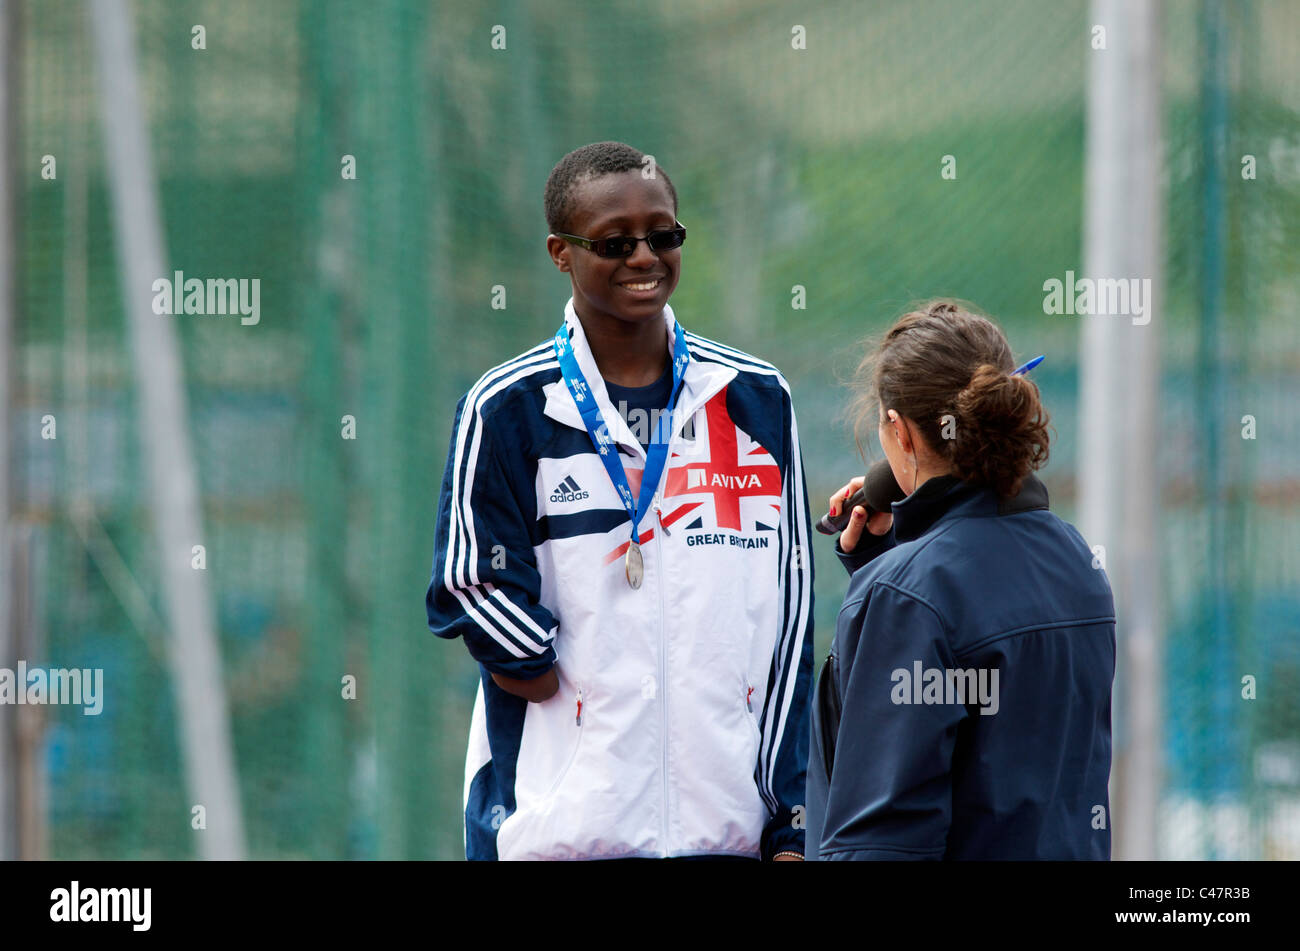 ola abidosun being interviewed after winning at paralympic world cup, manchester, may 2011 Stock Photo